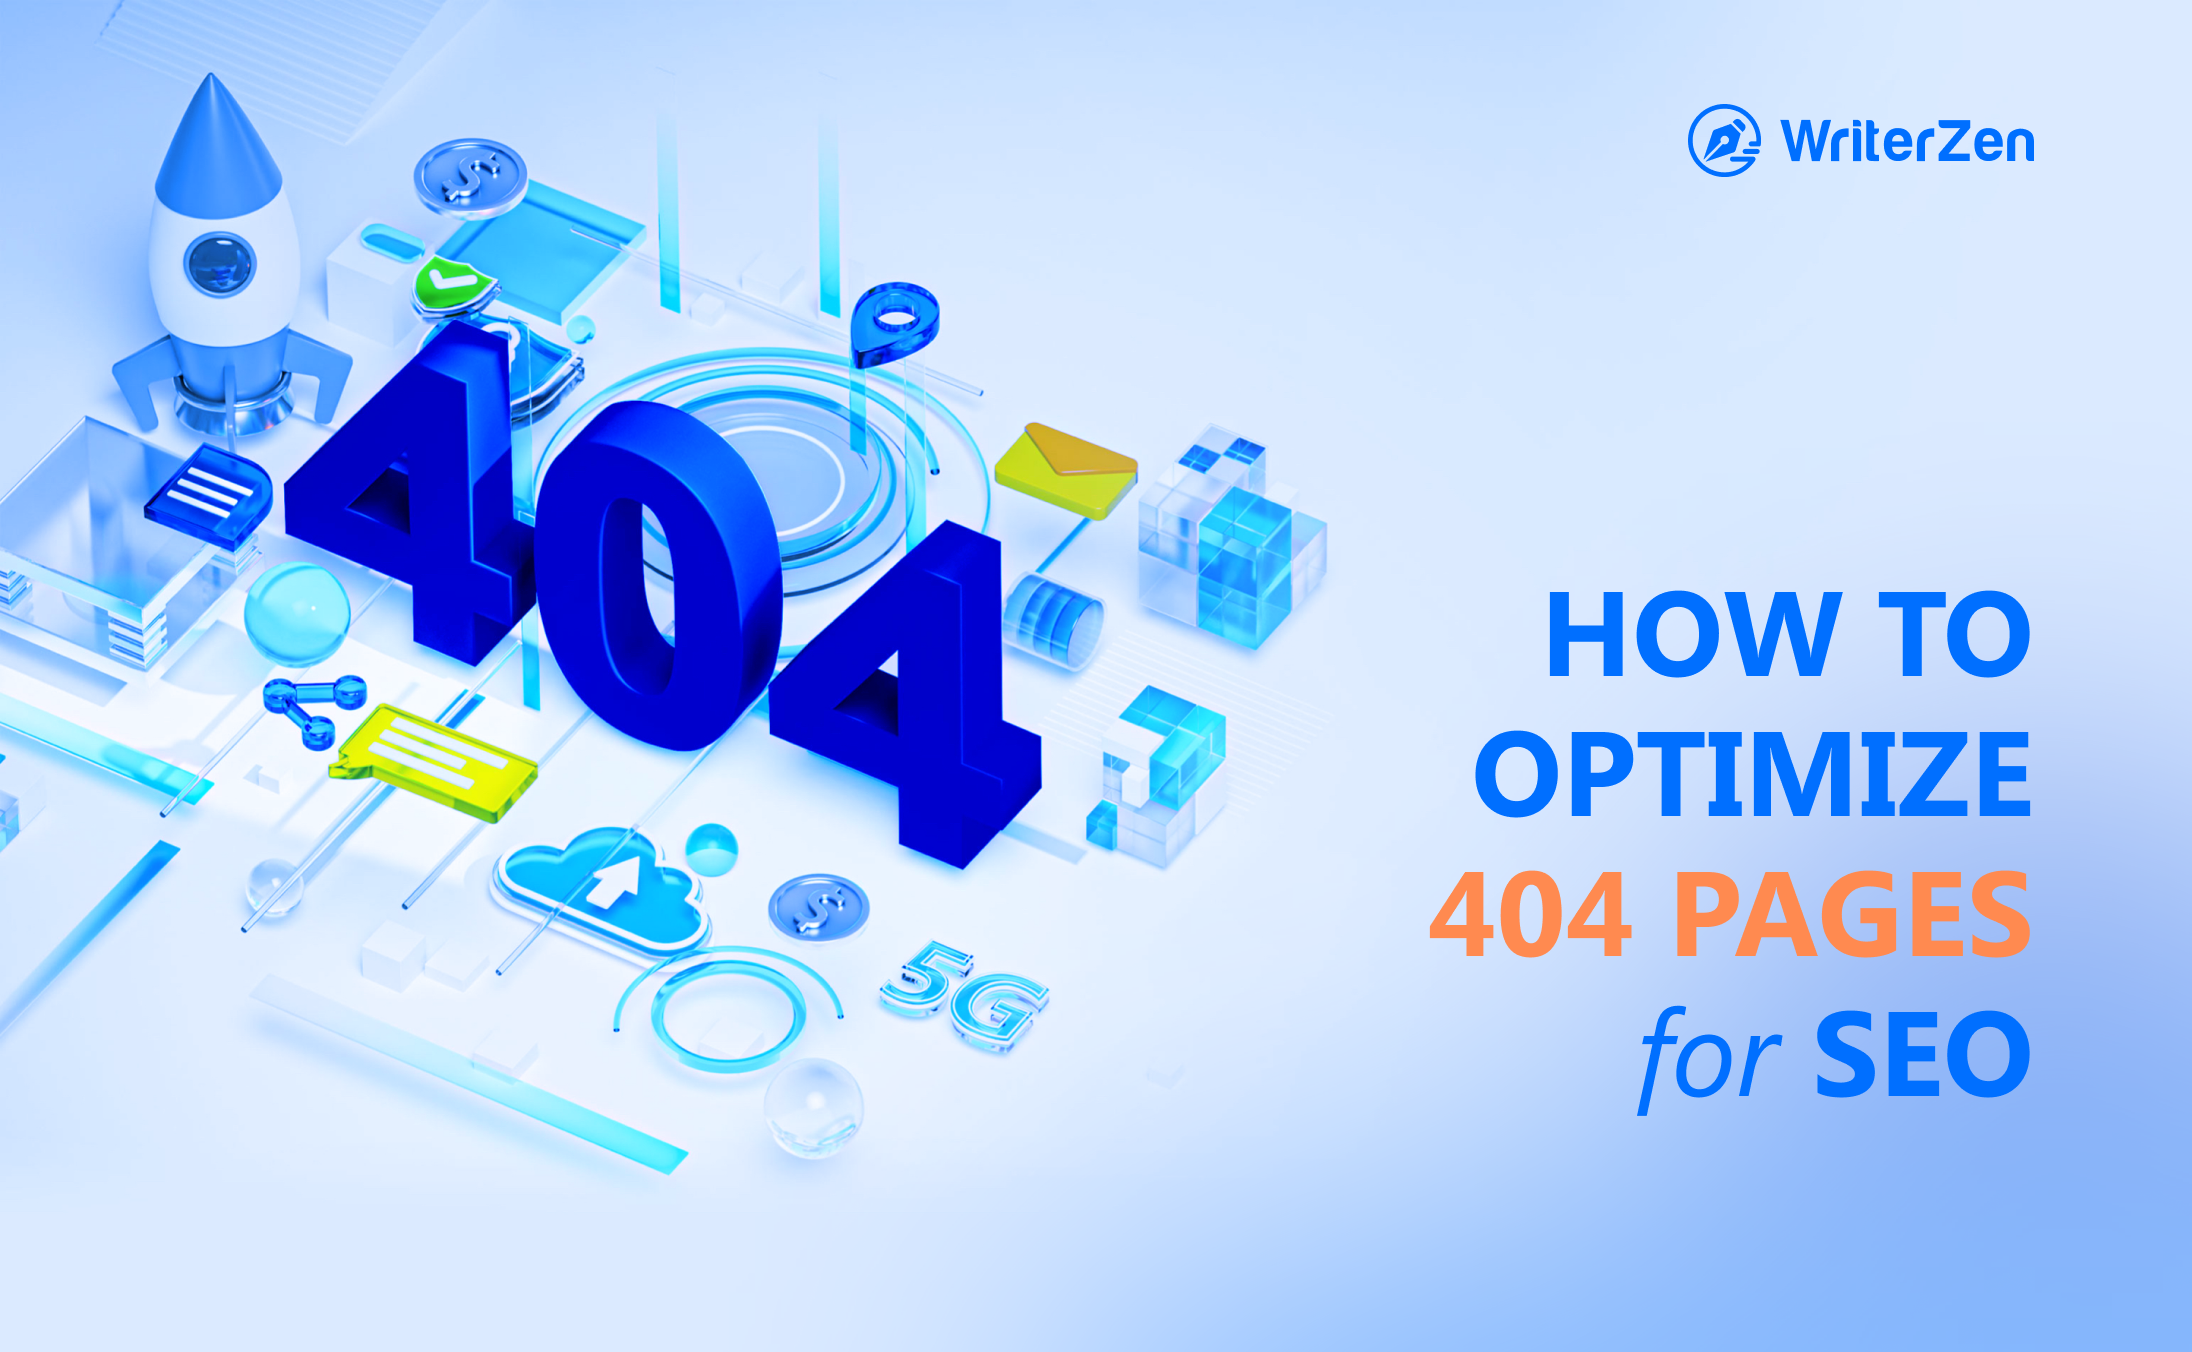 How to Optimize 404 Pages for SEO